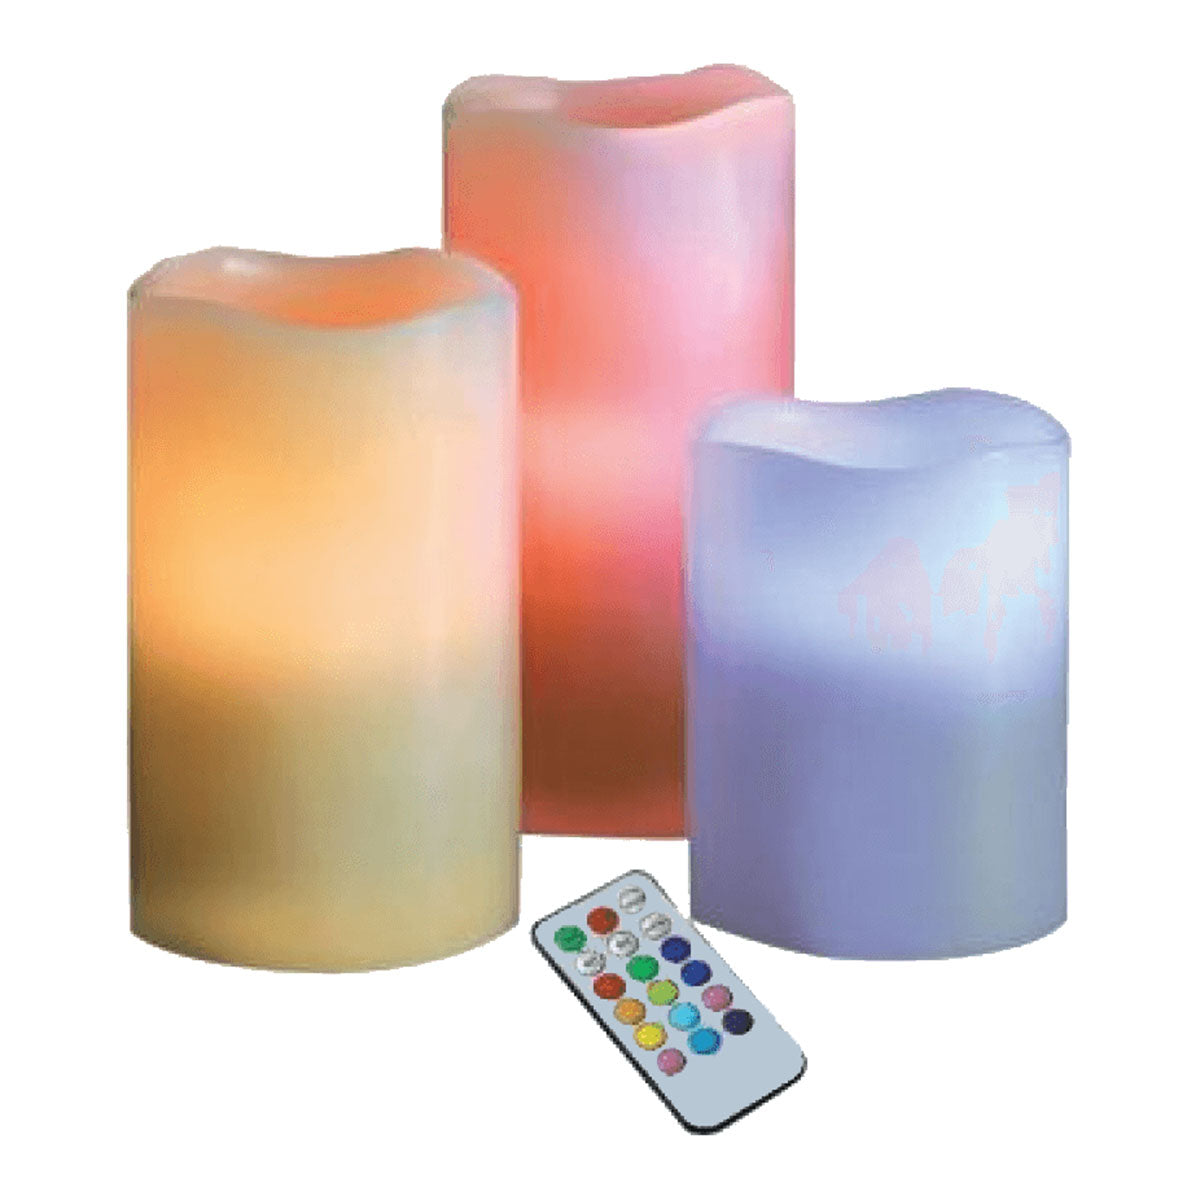 As Seen On TV Set of 3 Flameless LED Candle with Remote Control Electronic Plastic Candlelight